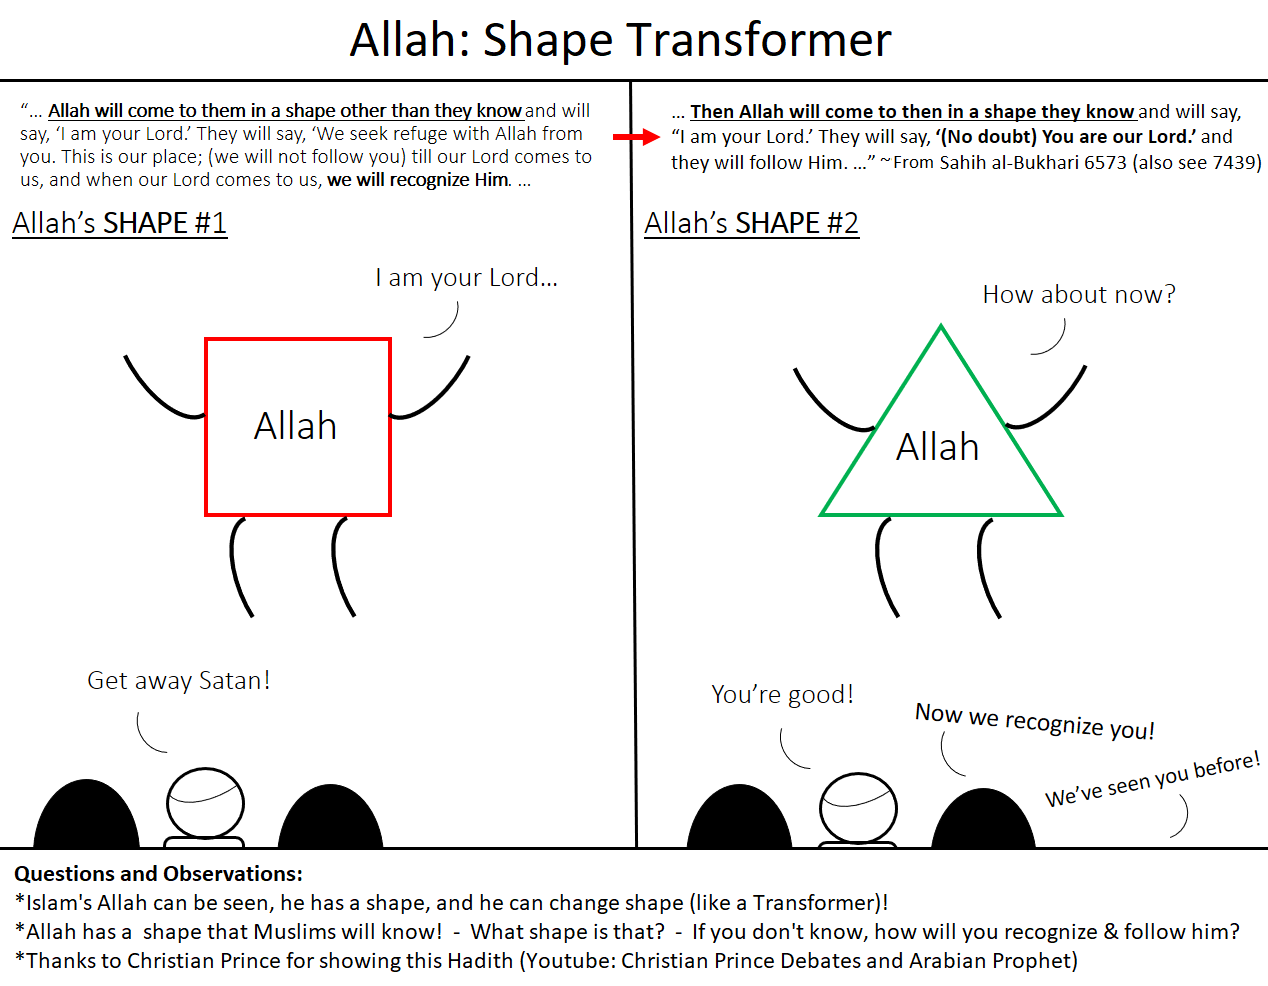 Allah changes shape and is recognized by the Muslims